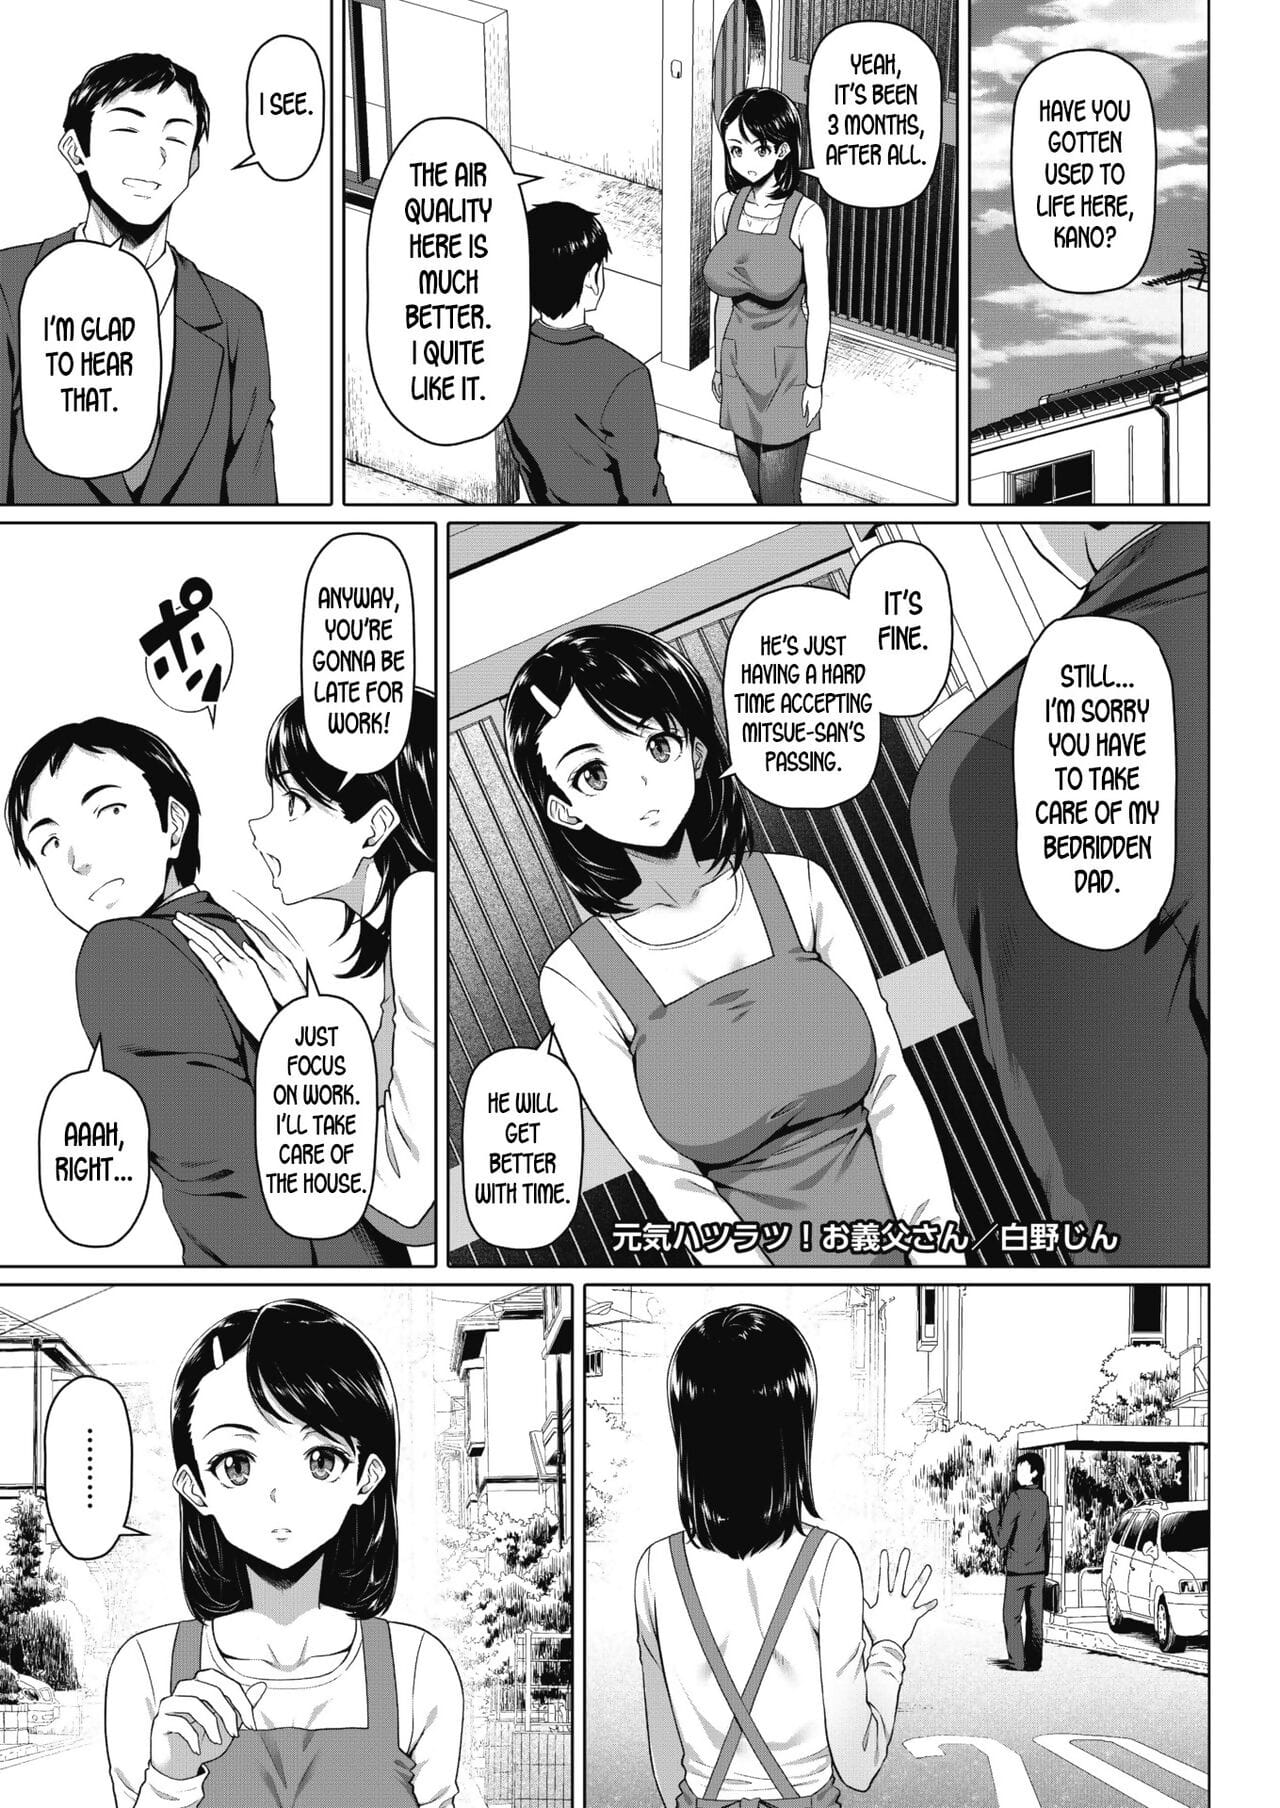 Genki Hatsuratsu! Otou-san - The Lively Father in Law page 1